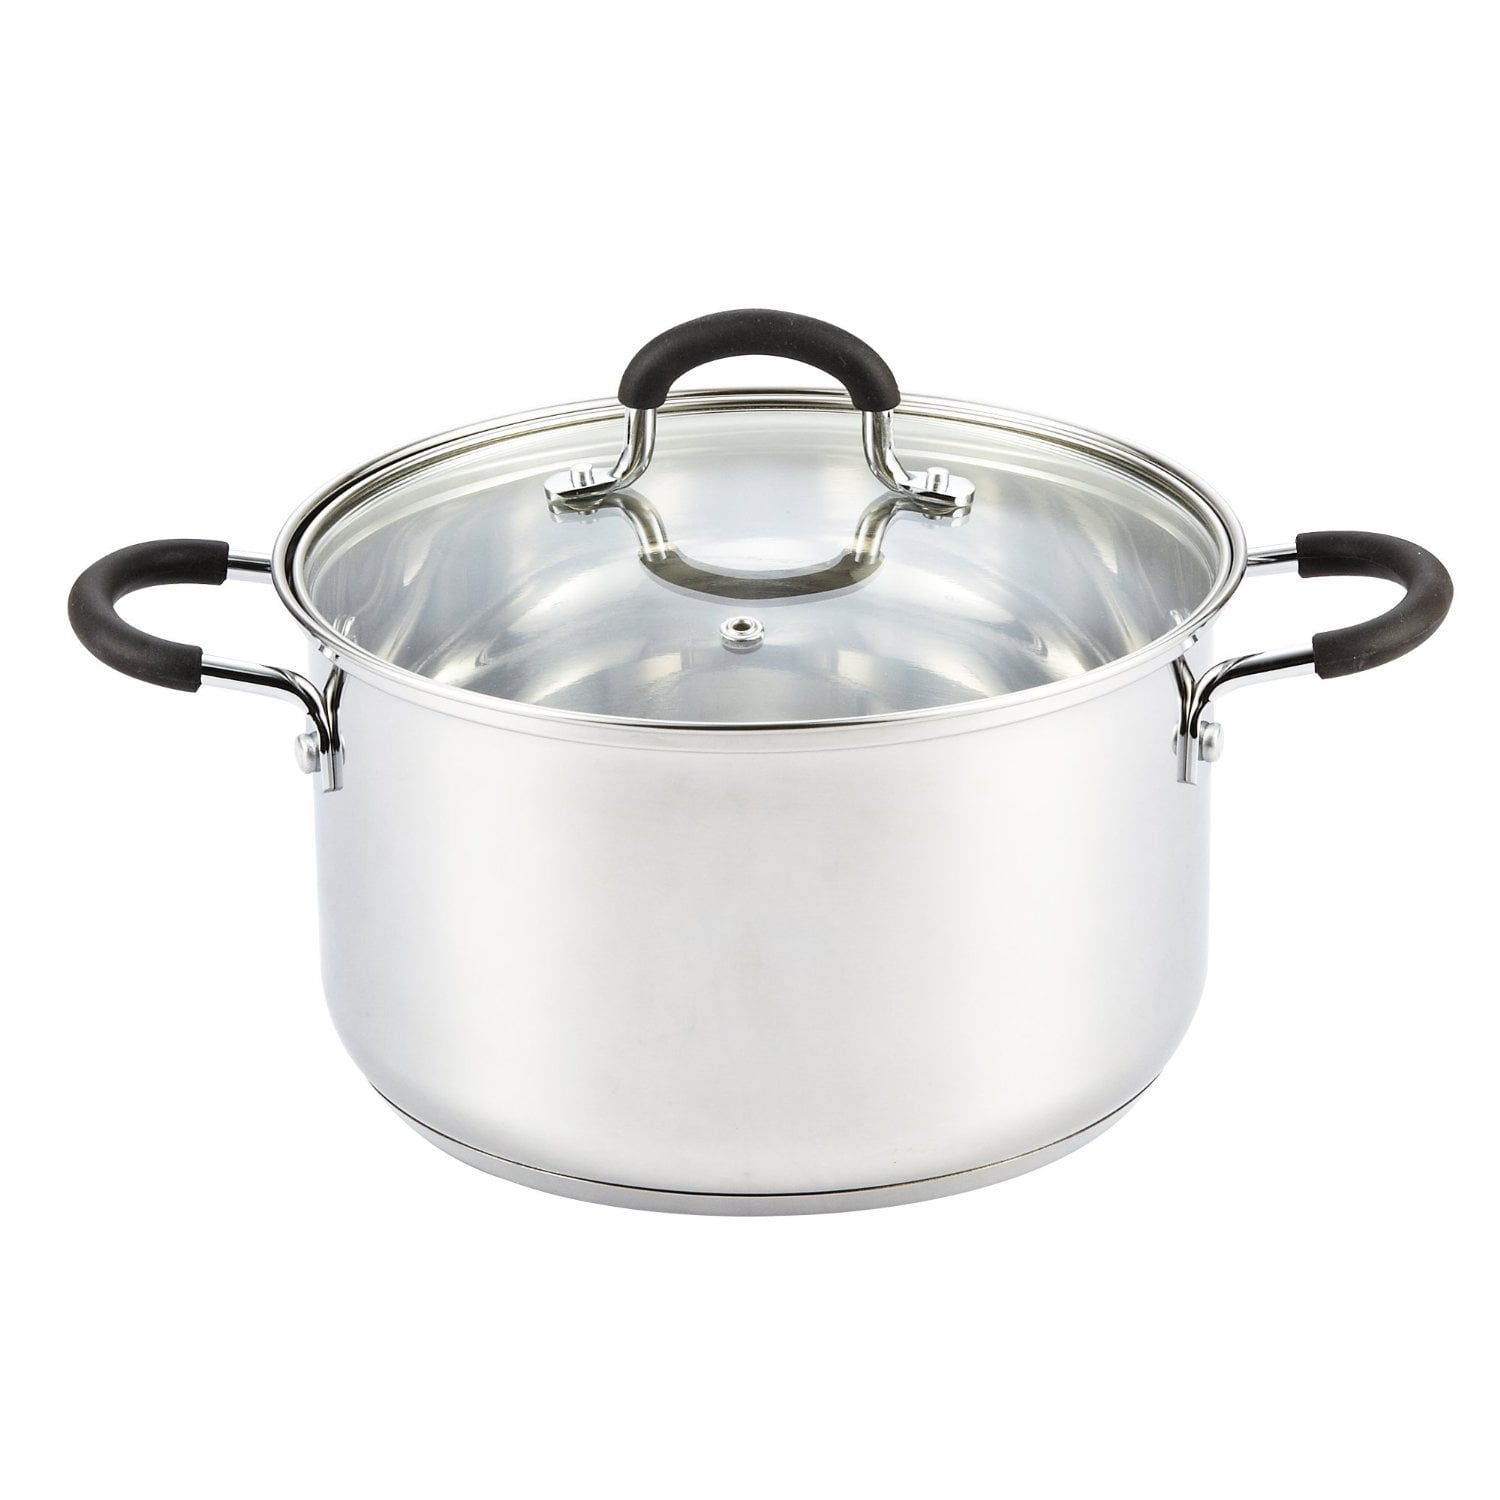 16 QT Stainless Steel Stock Pot & Lid (E9076474), All-Clad